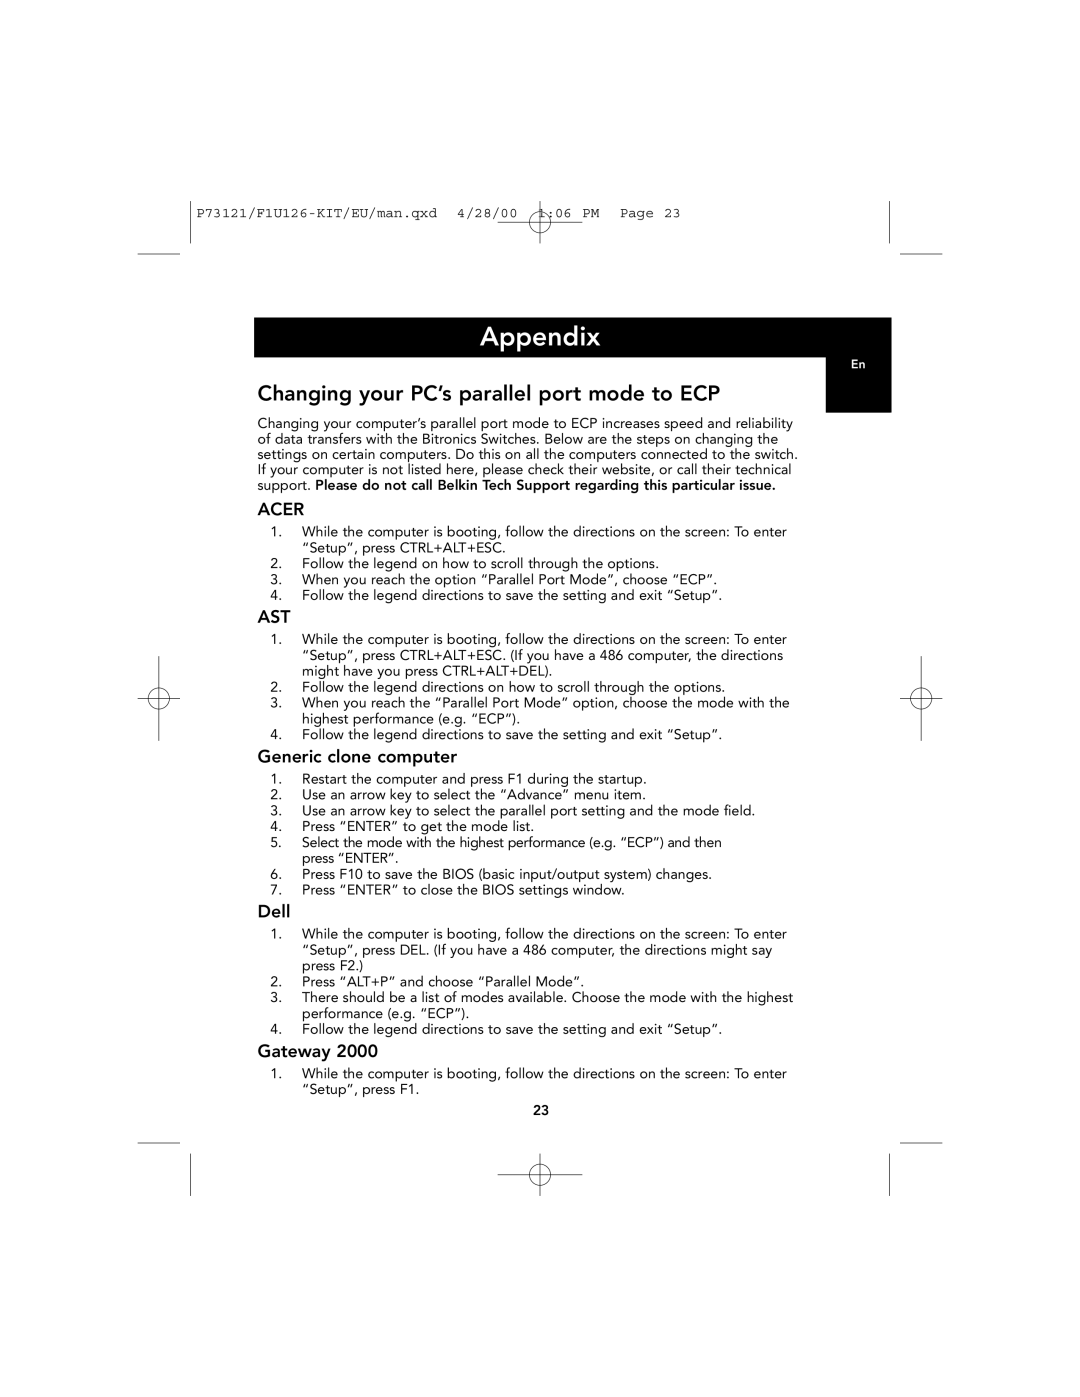 Belkin F1U126-KIT, P73121 user manual Appendix, Changing your PC’s parallel port mode to ECP 